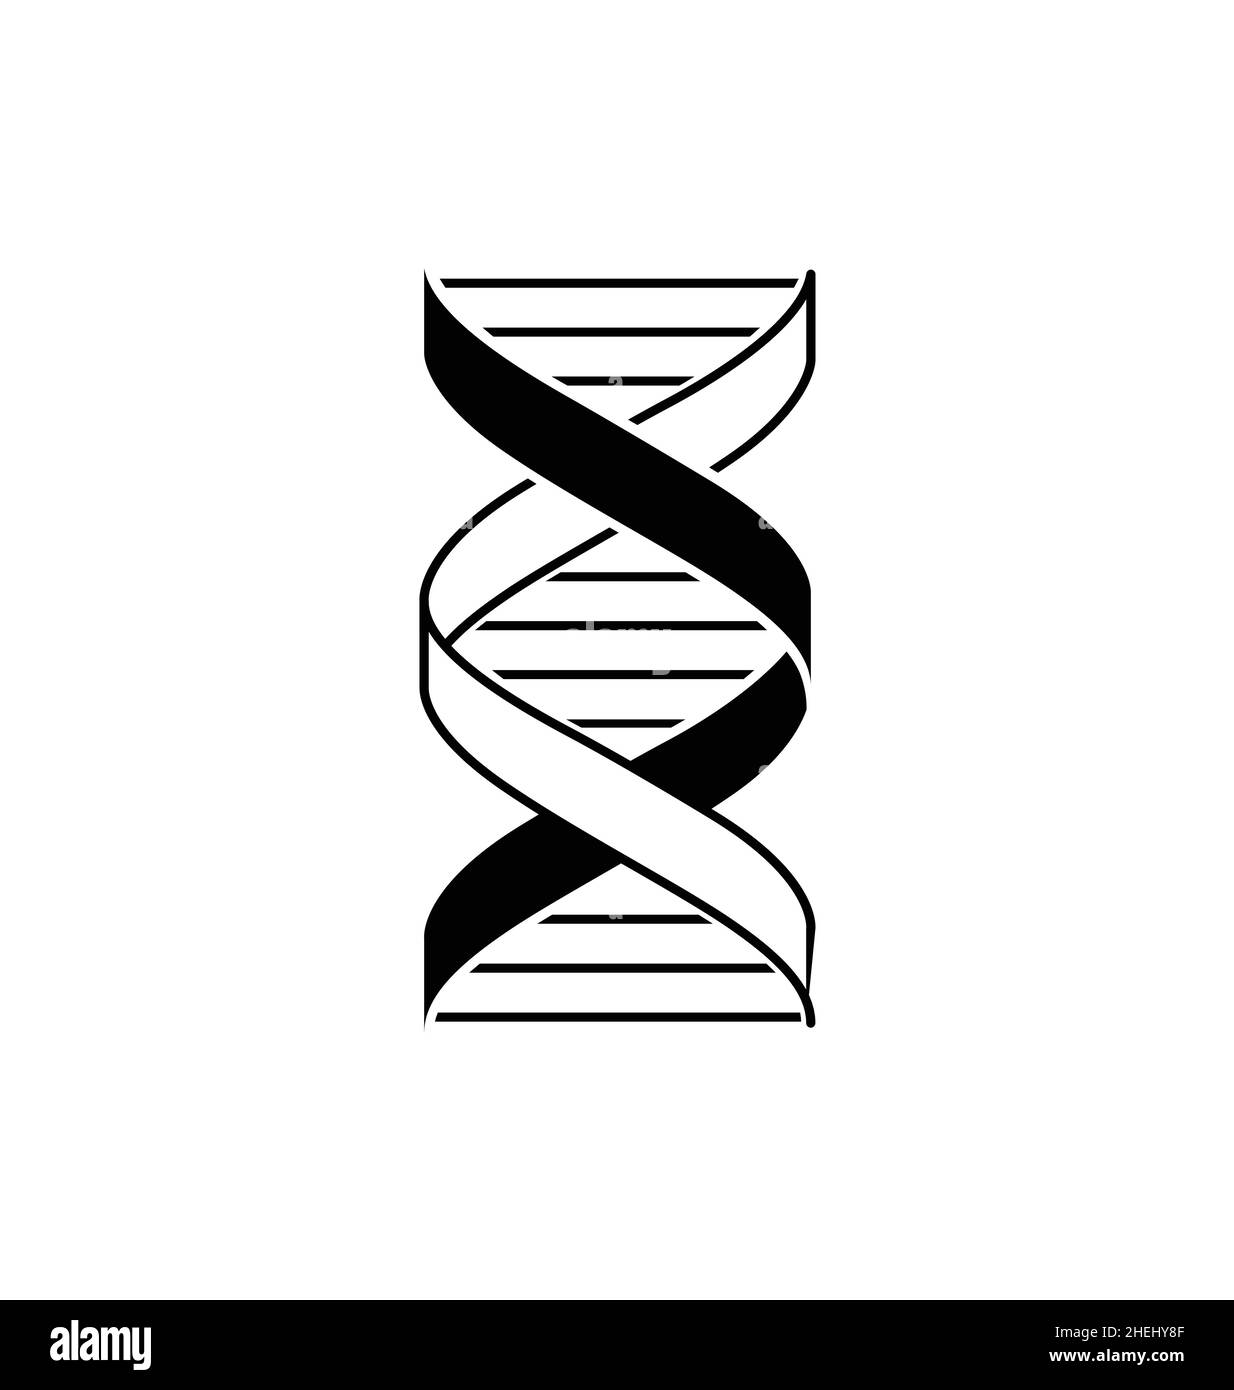 dna strand double helix segment icon element simplified black and white isolated on white background vector Stock Vector